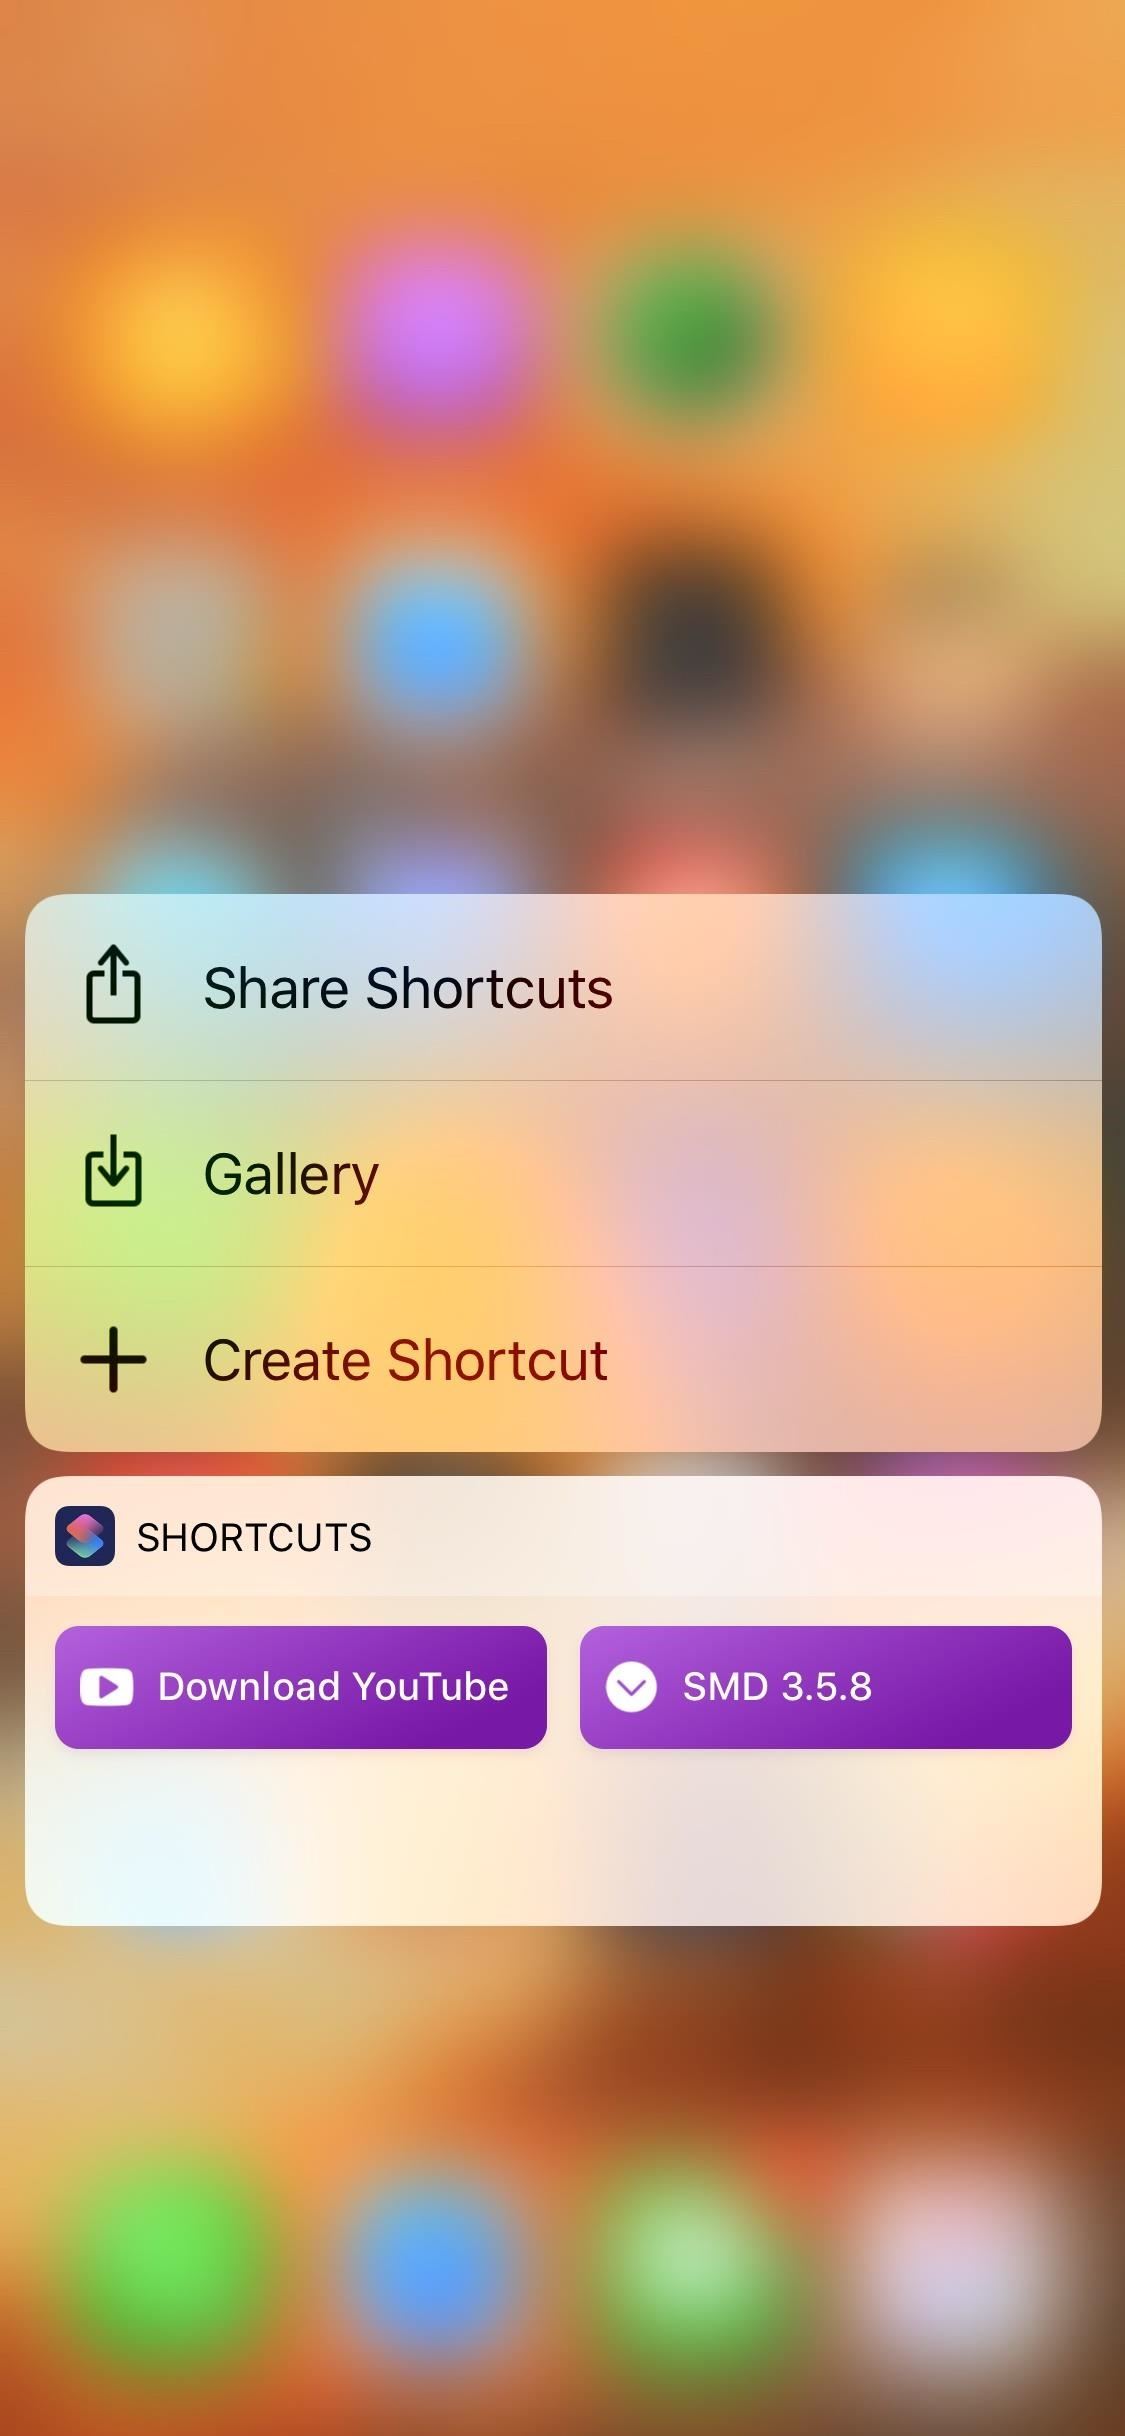 How to Download Instagram Videos on Your iPhone